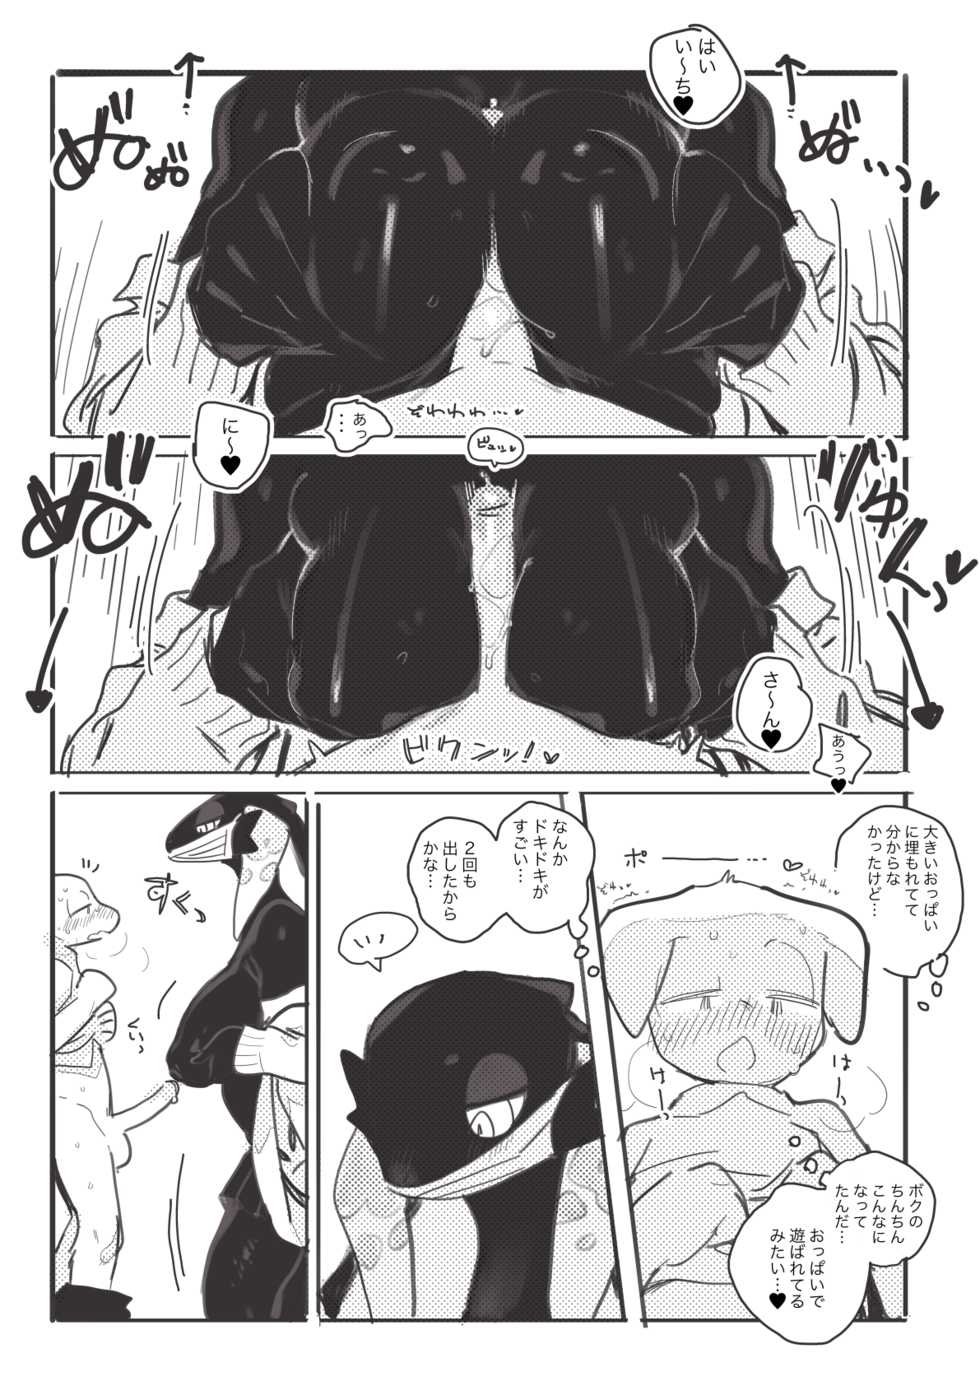 [INAX/TOTO] Lizard Gals Manga: Introduction - Page 30